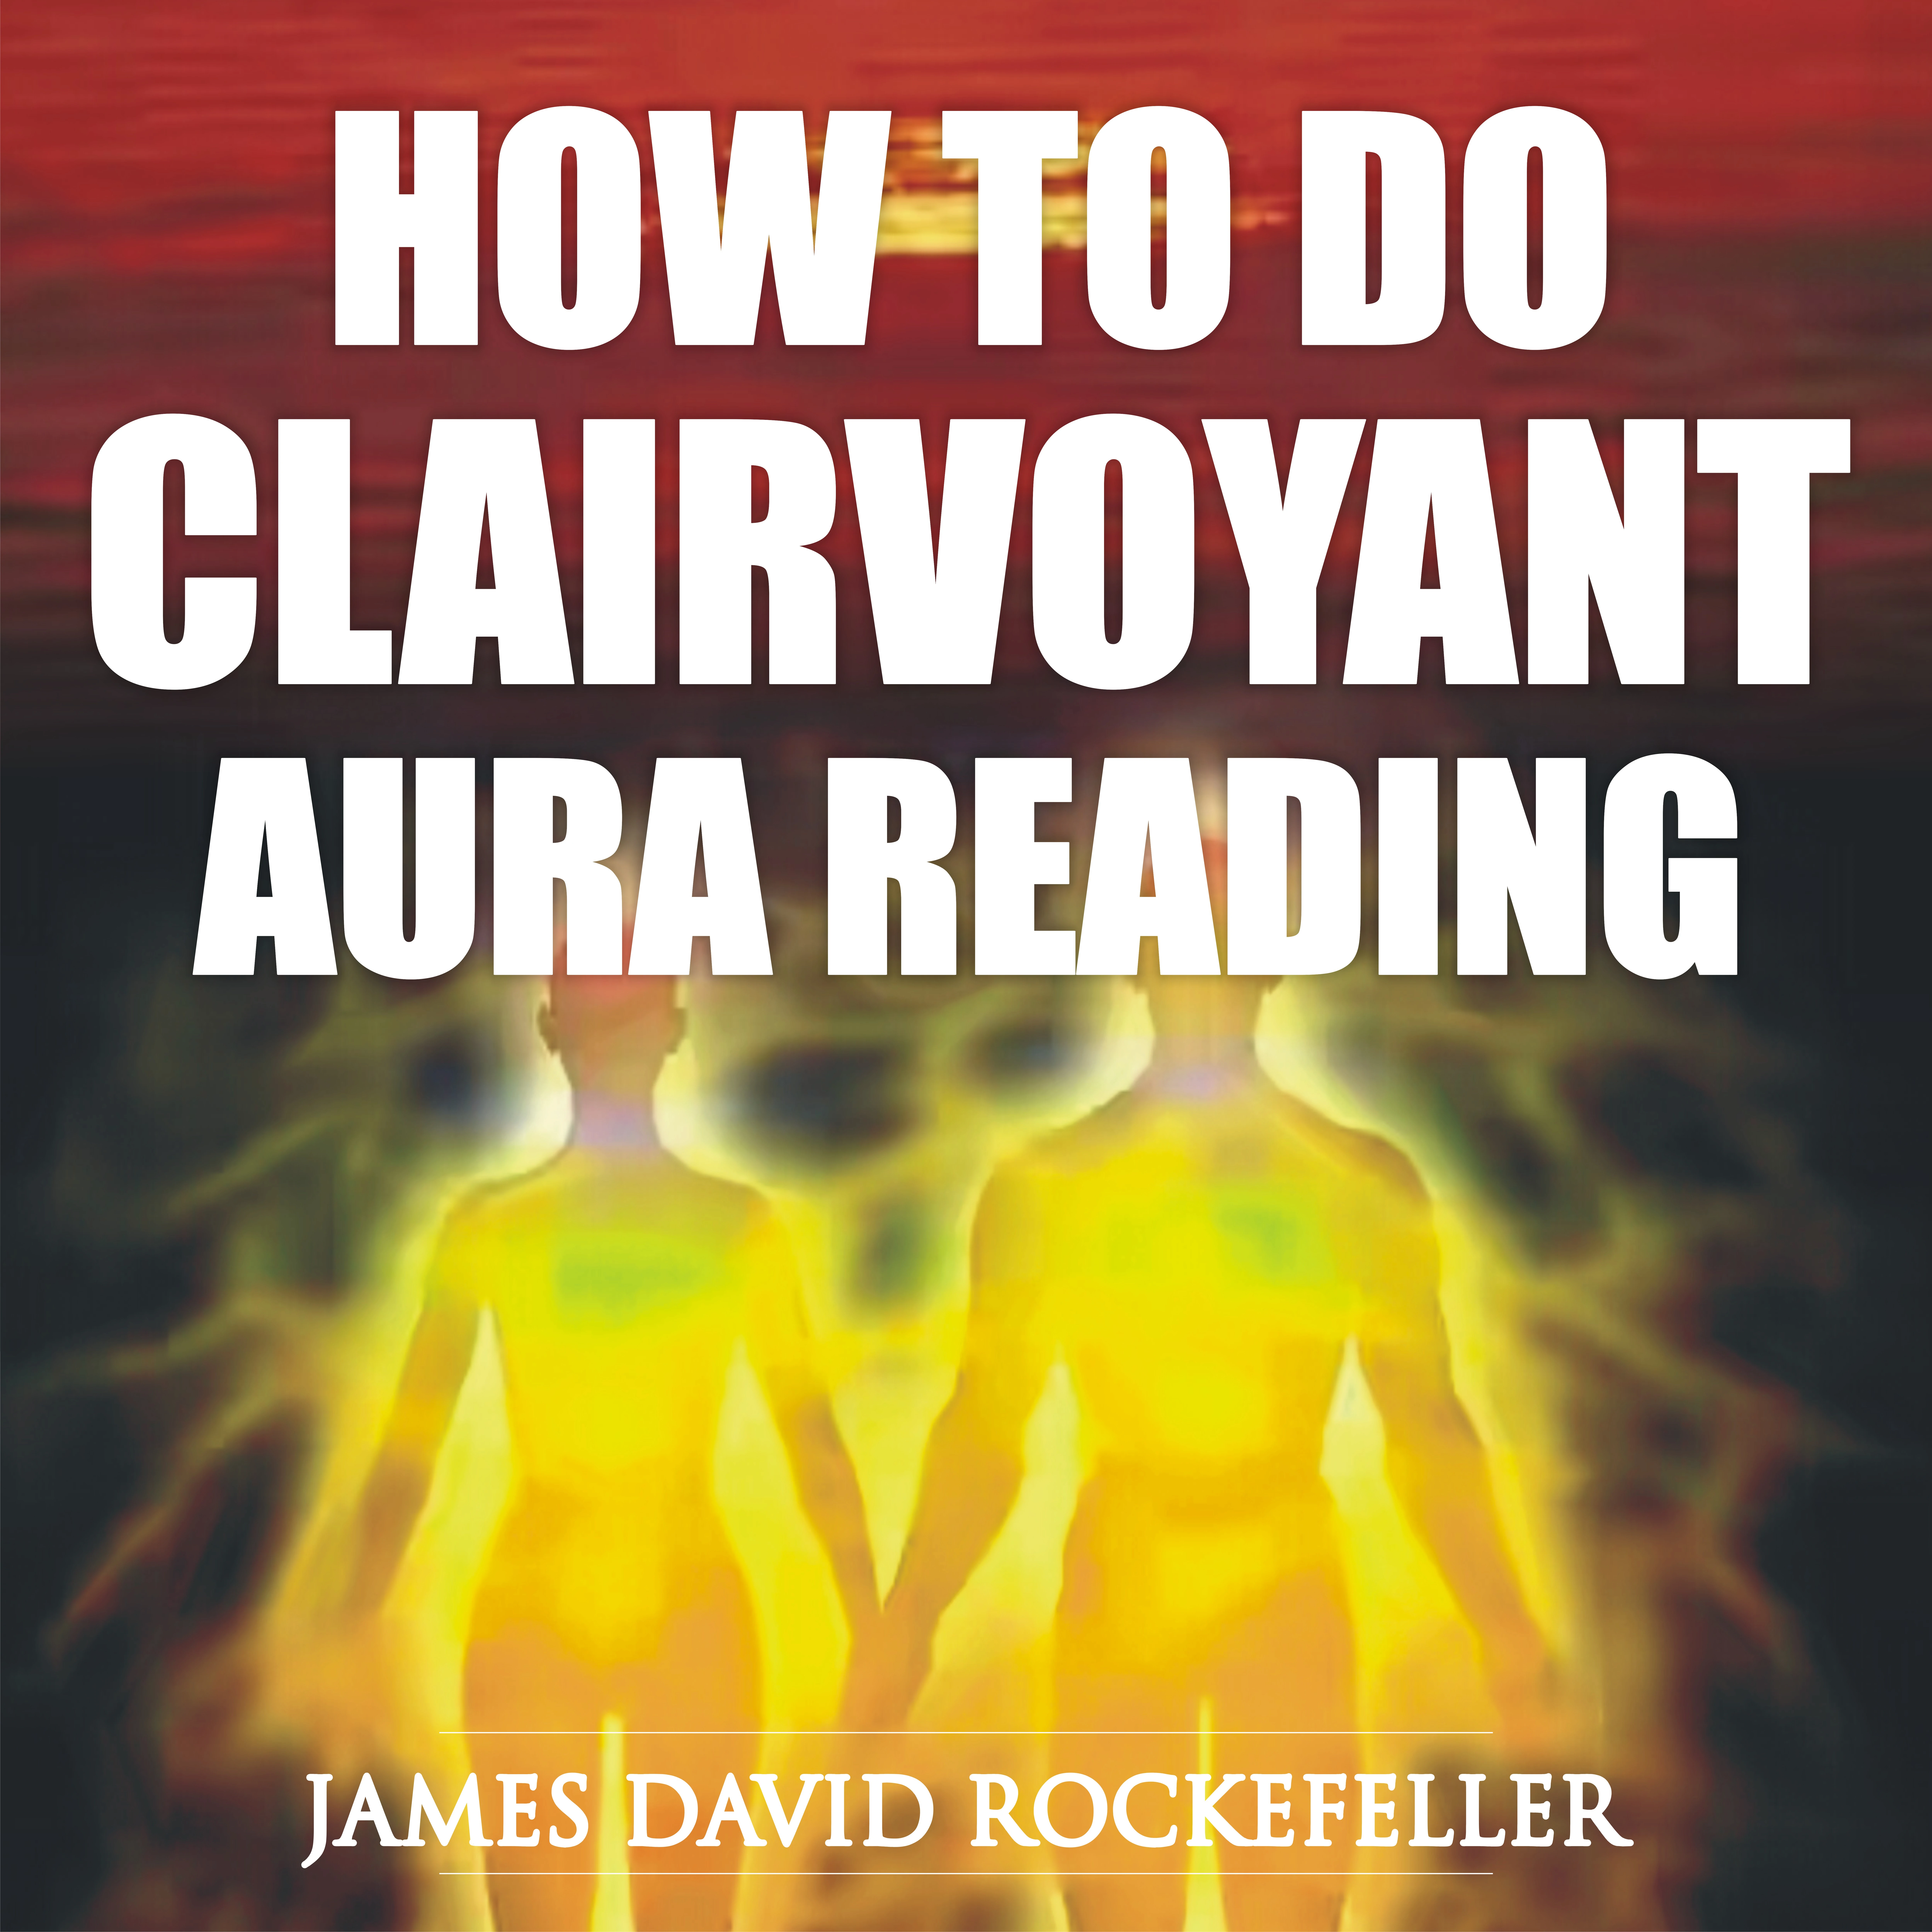 How to Do Clairvoyant Aura Reading Audiobook by James David Rockefeller